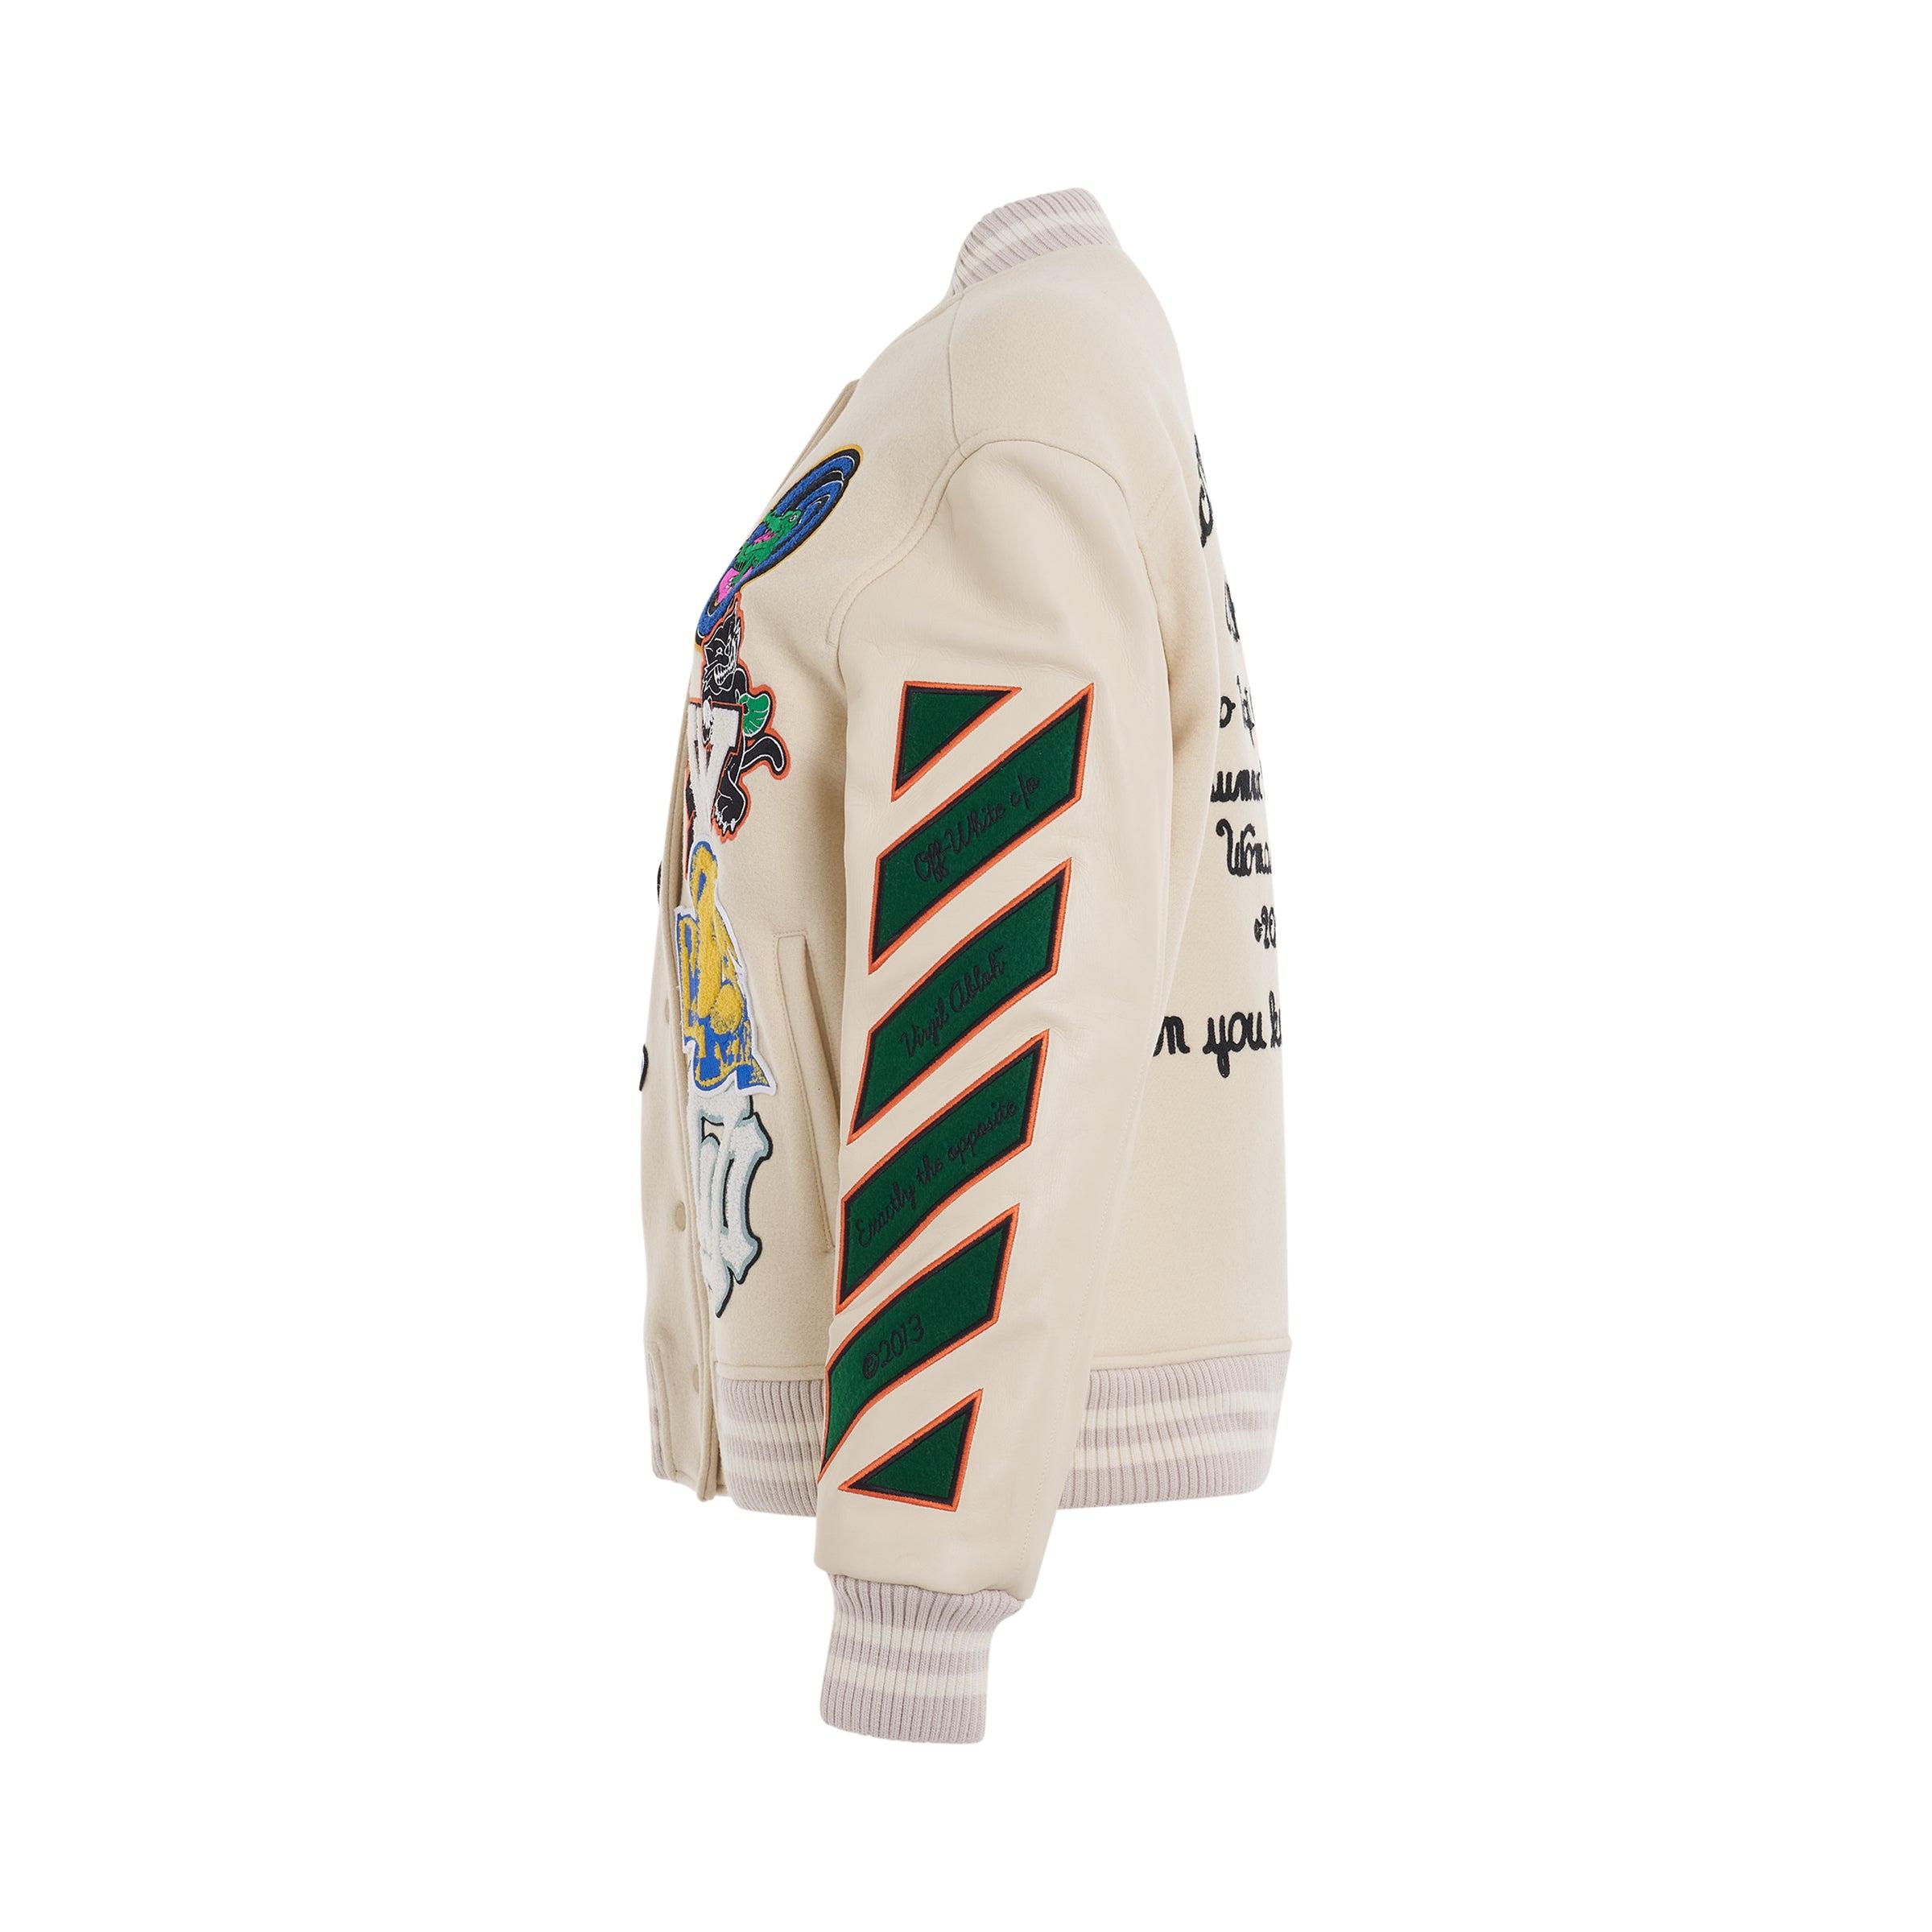 Off-White c/o Virgil Abloh Embroidered Graphics Leather Varsity In